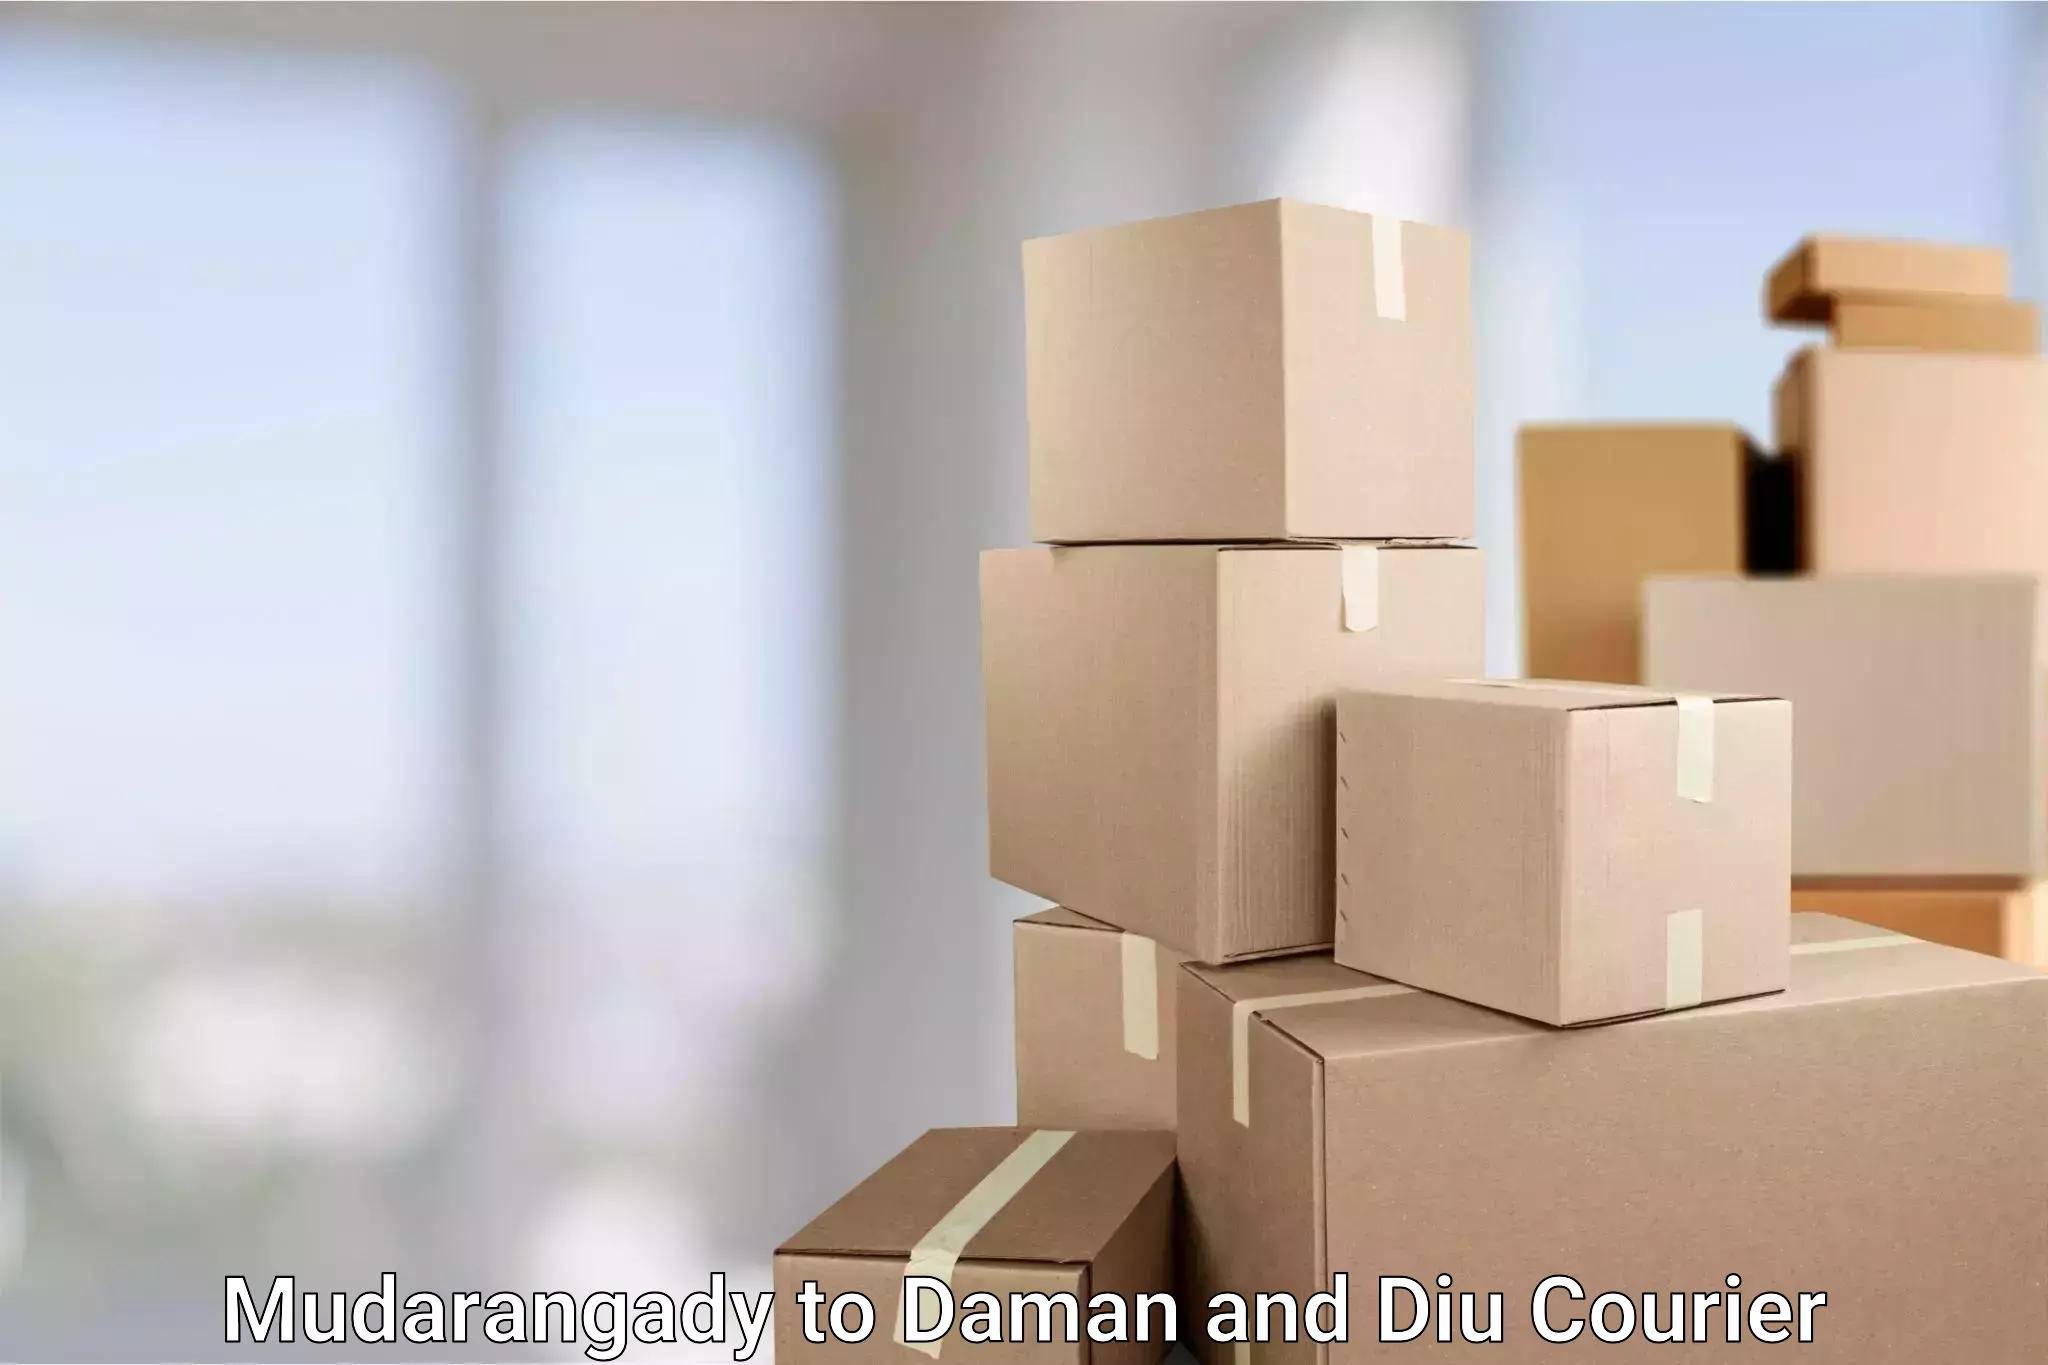 Same-day delivery solutions Mudarangady to Daman and Diu